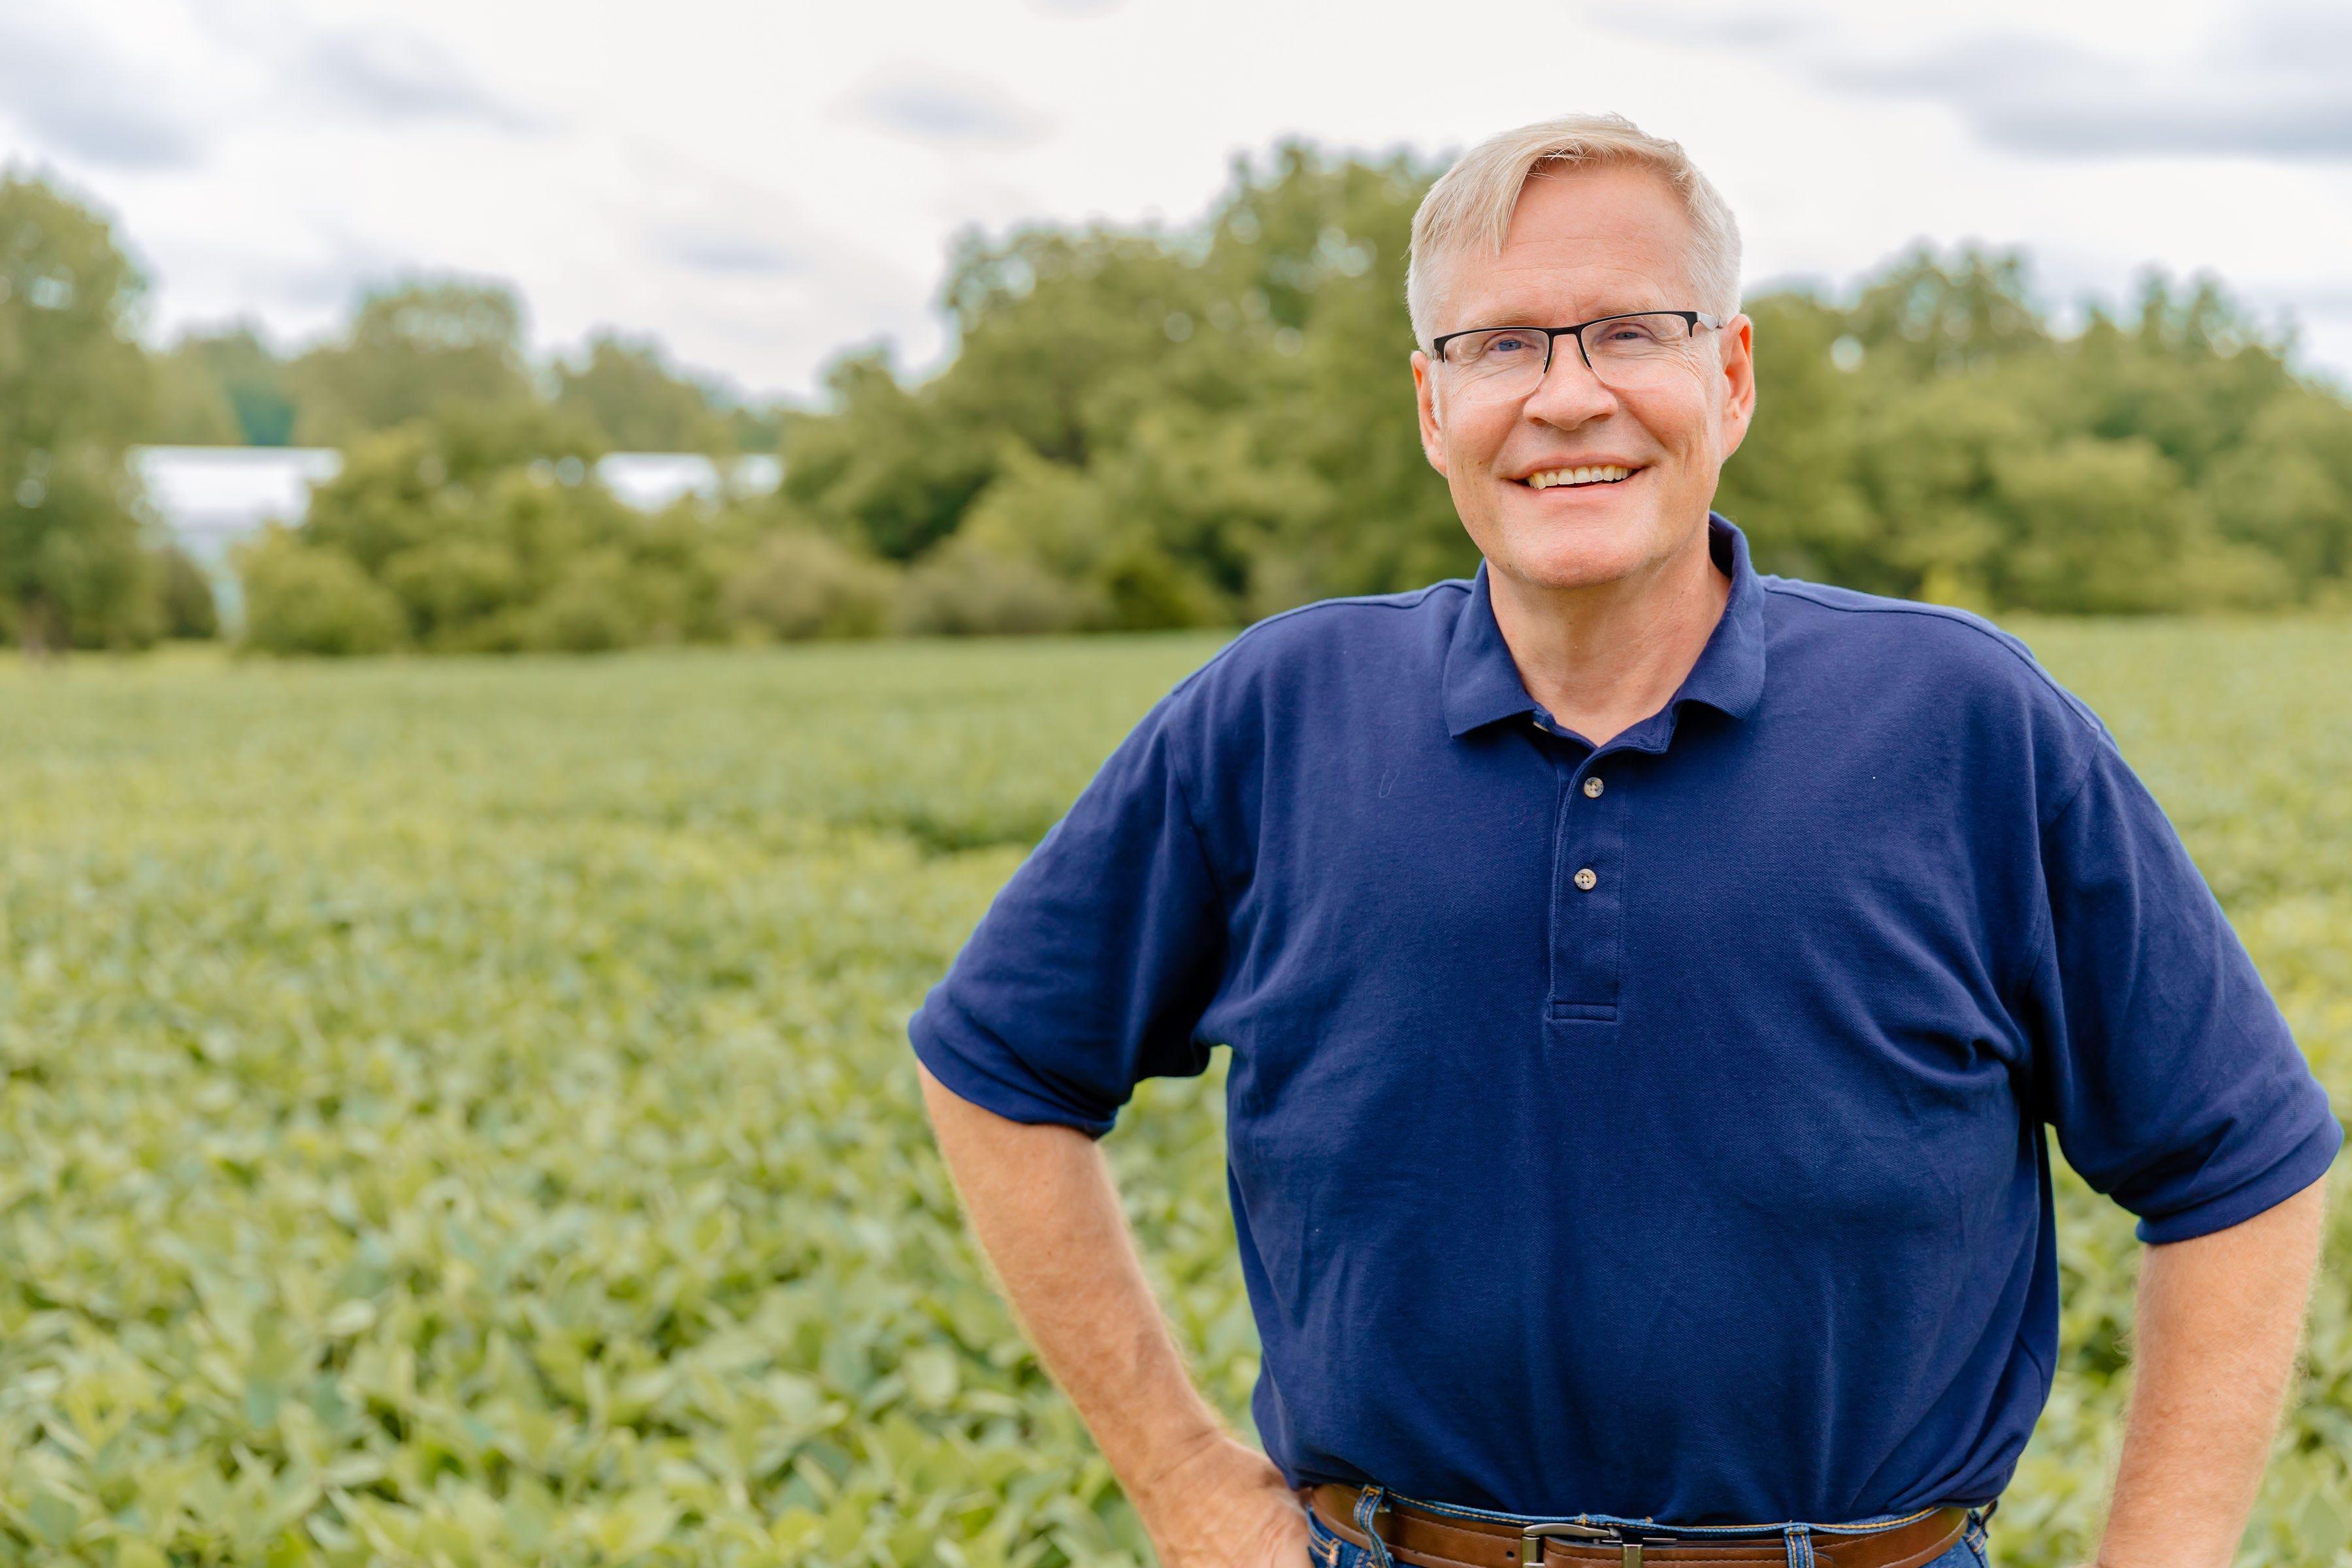 John Rust, board chair of egg producer Rose Acre Farms in Seymour, announced he is running as a Republican for Indiana